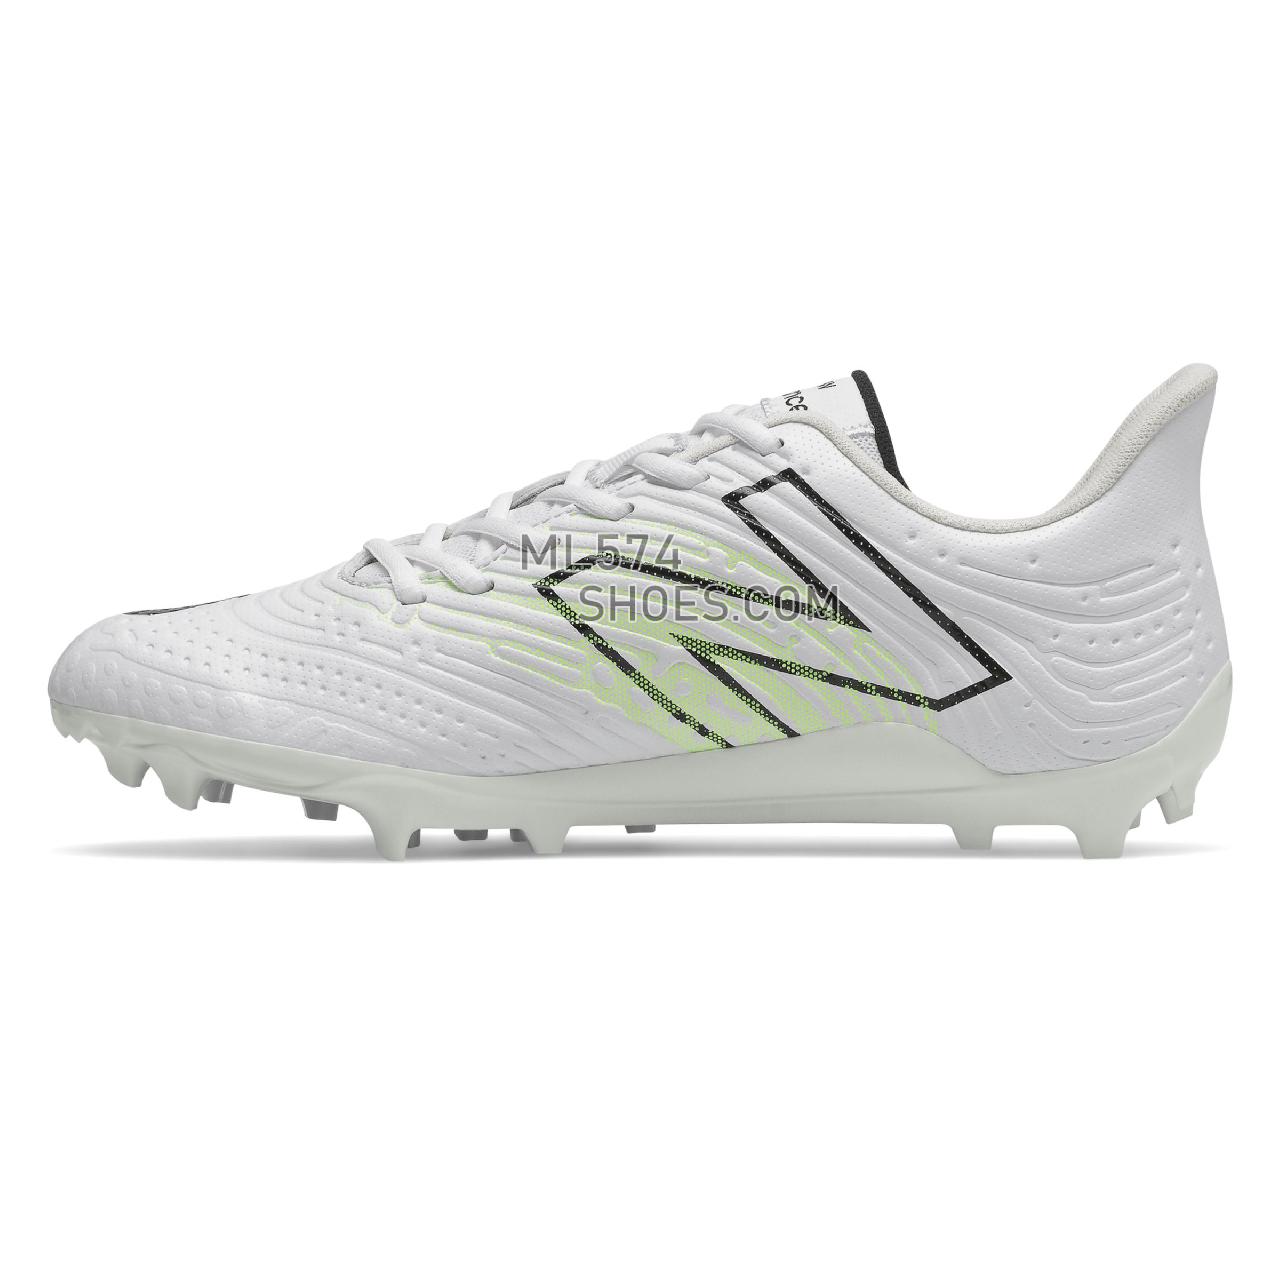 New Balance RushV3 Low - Men's Turf And Lacrosse Cleats - White with Silver - RUSHLW3